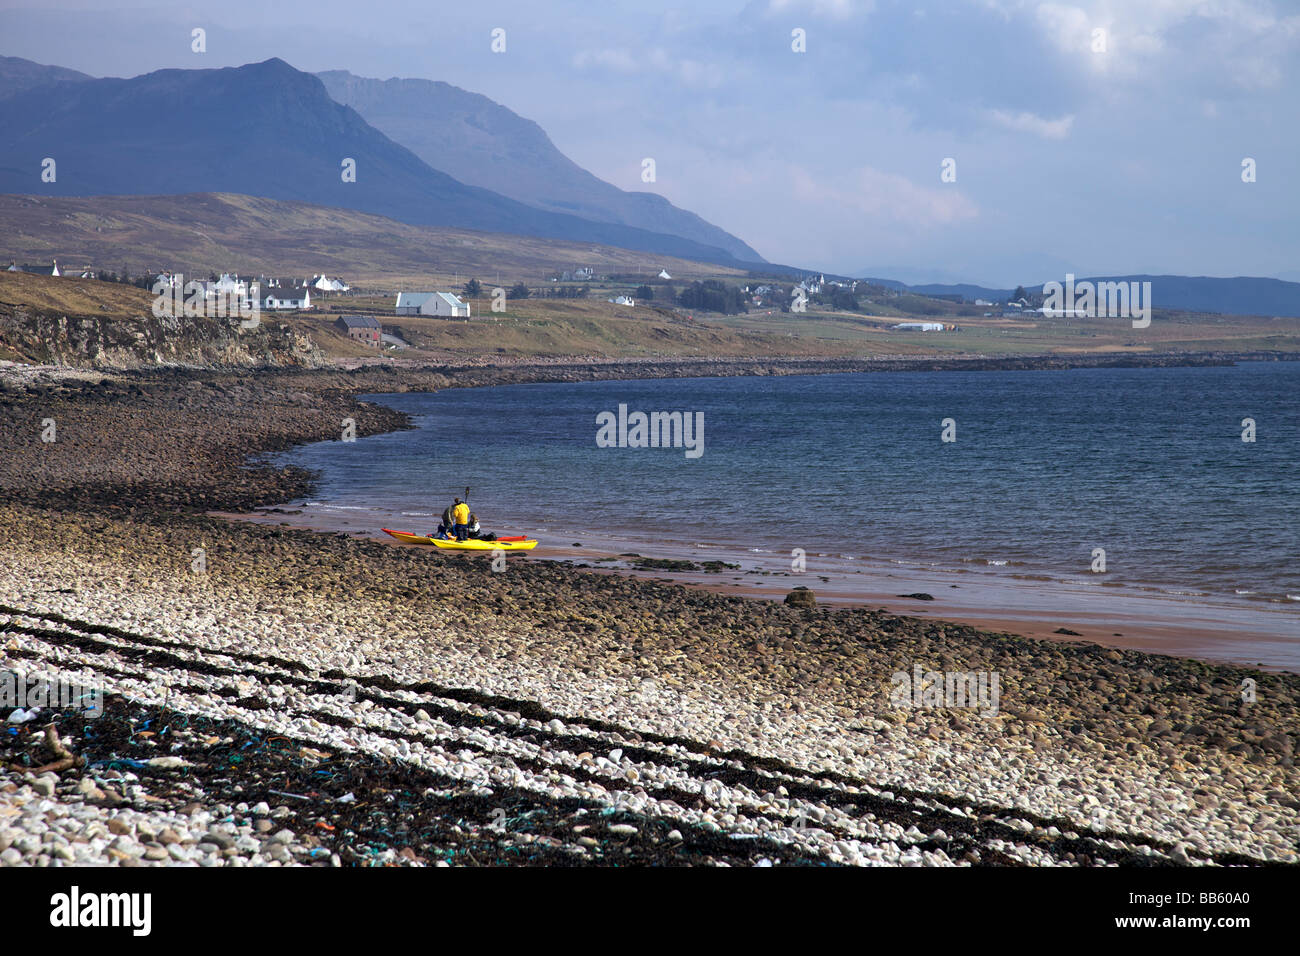 Canoers at Achiltibuie, North west highlands of Scotland, on a sunny day in April Stock Photo